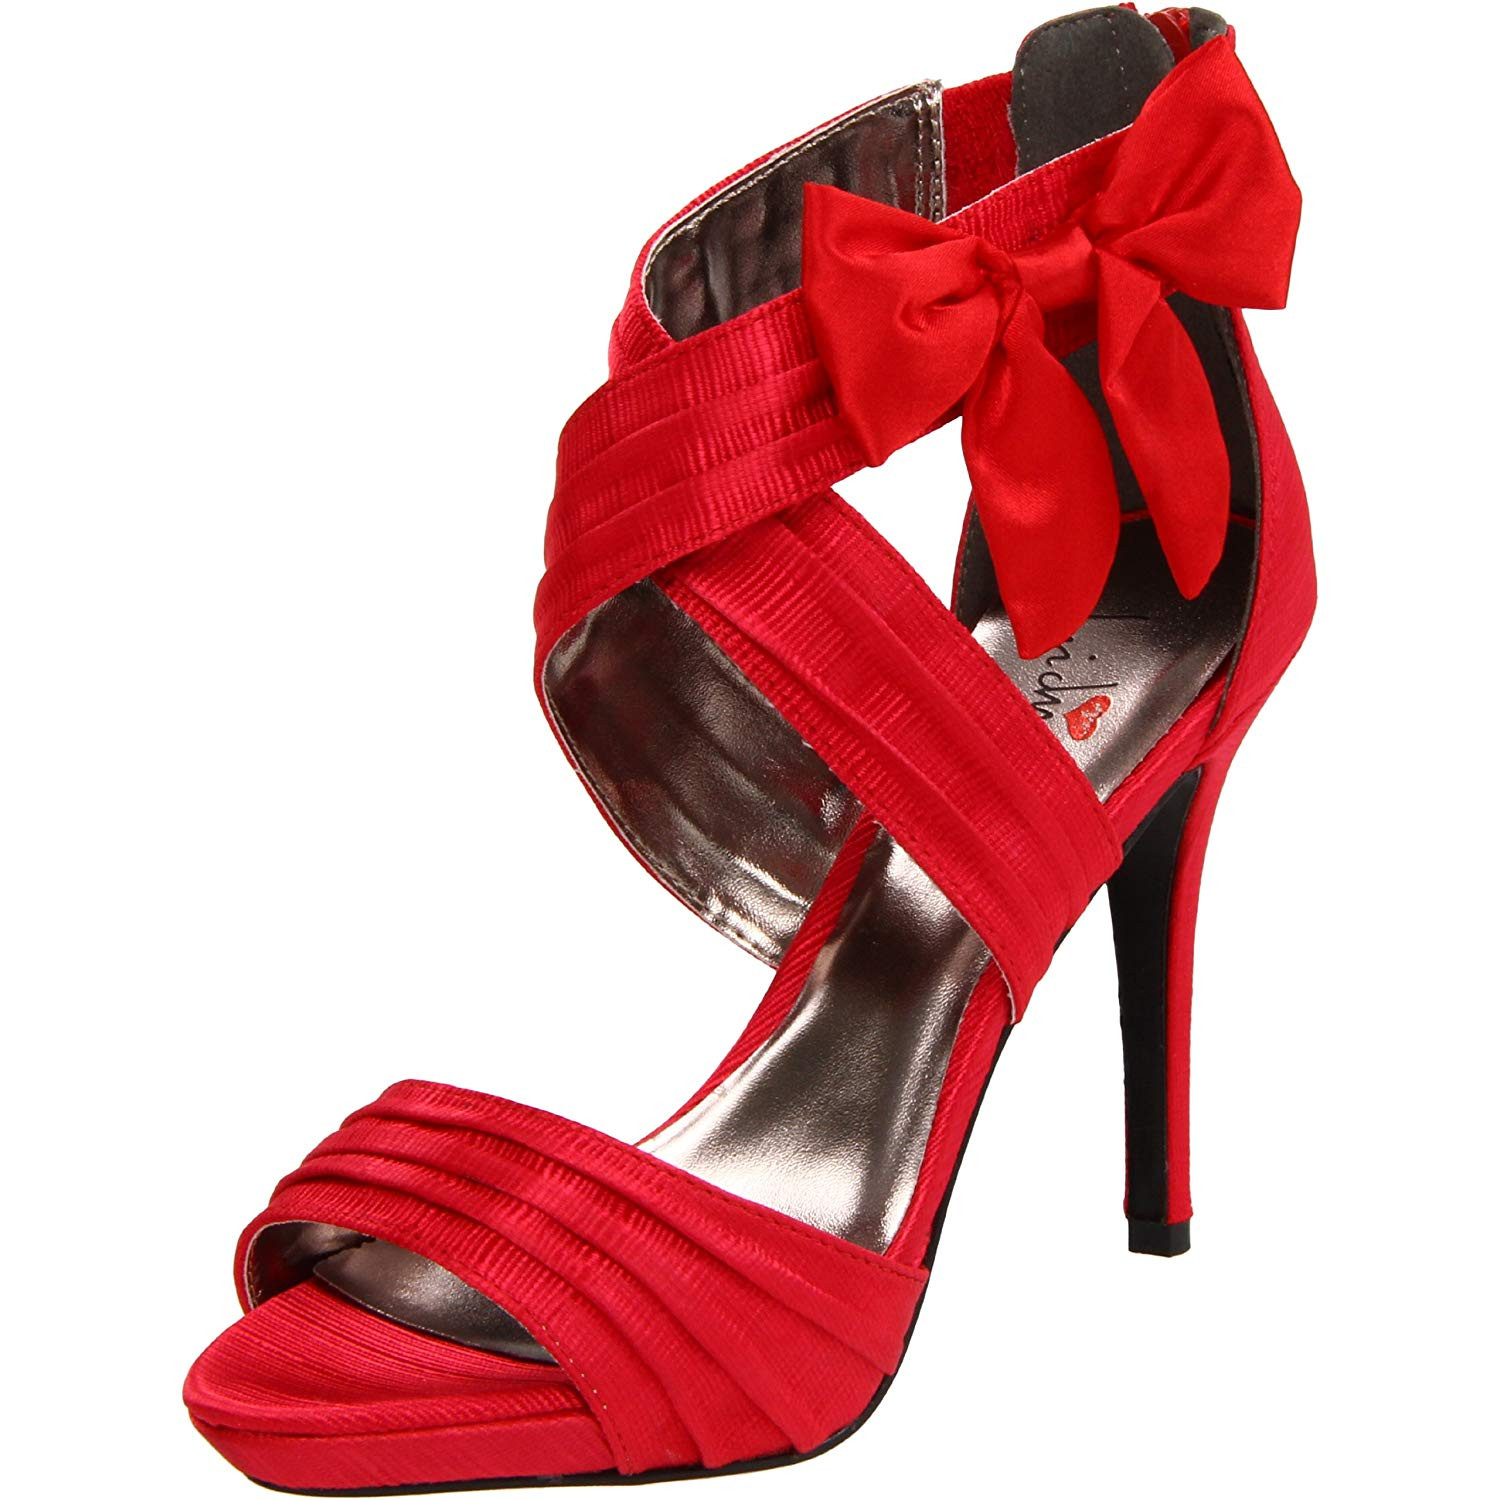 Red Wedding Shoes For Bride
 Red Wedding Shoes Lots of Wedding Ideas